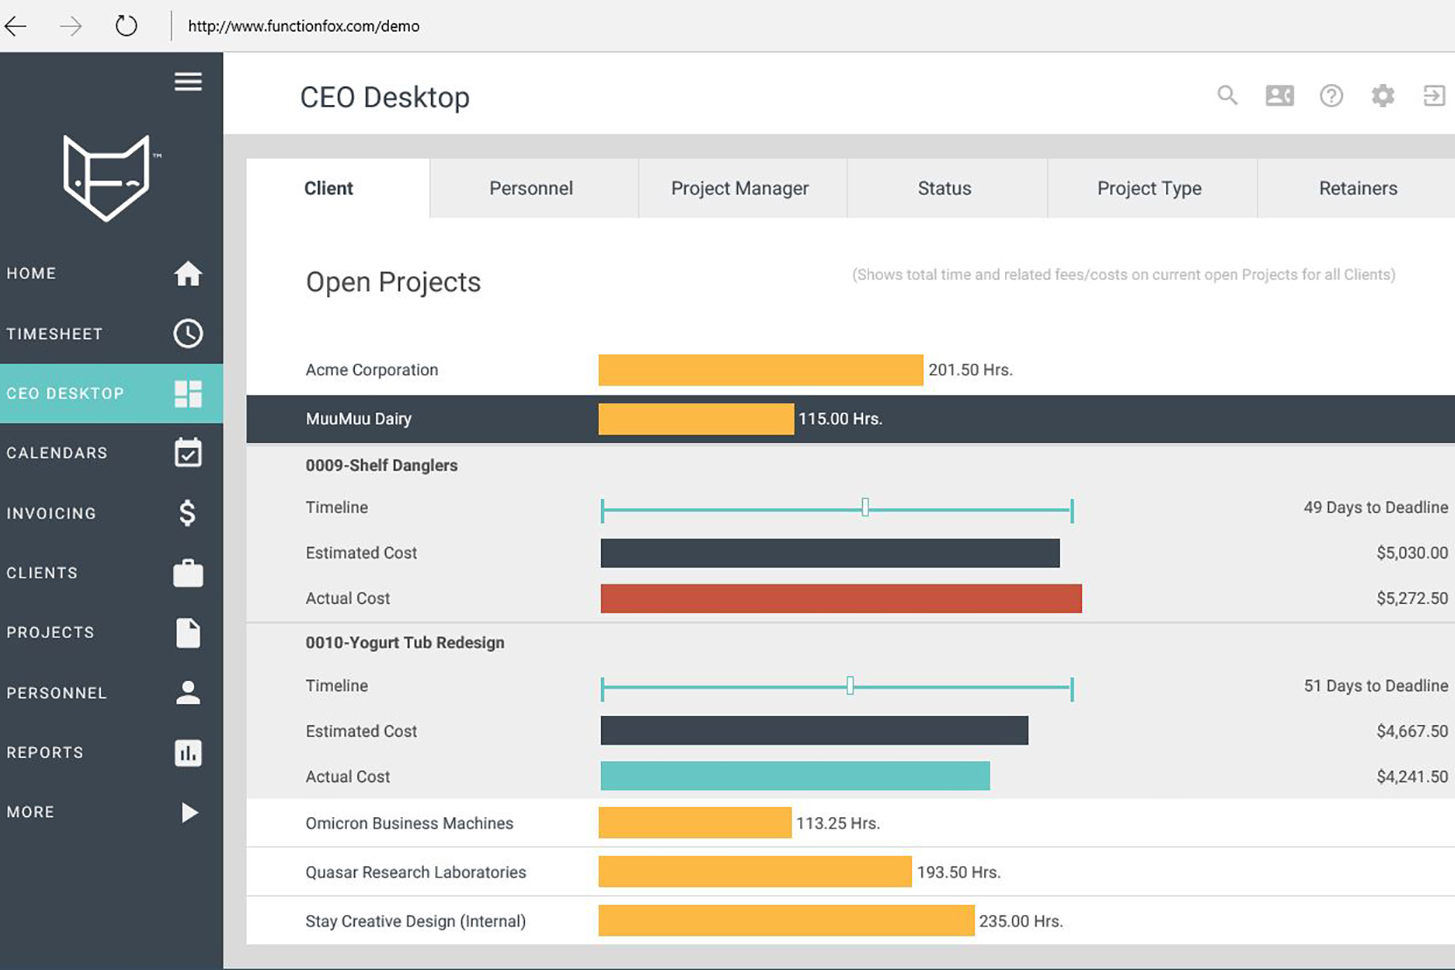 14 Best Project Management Software For Creative Agencies. #8 FunctionFox